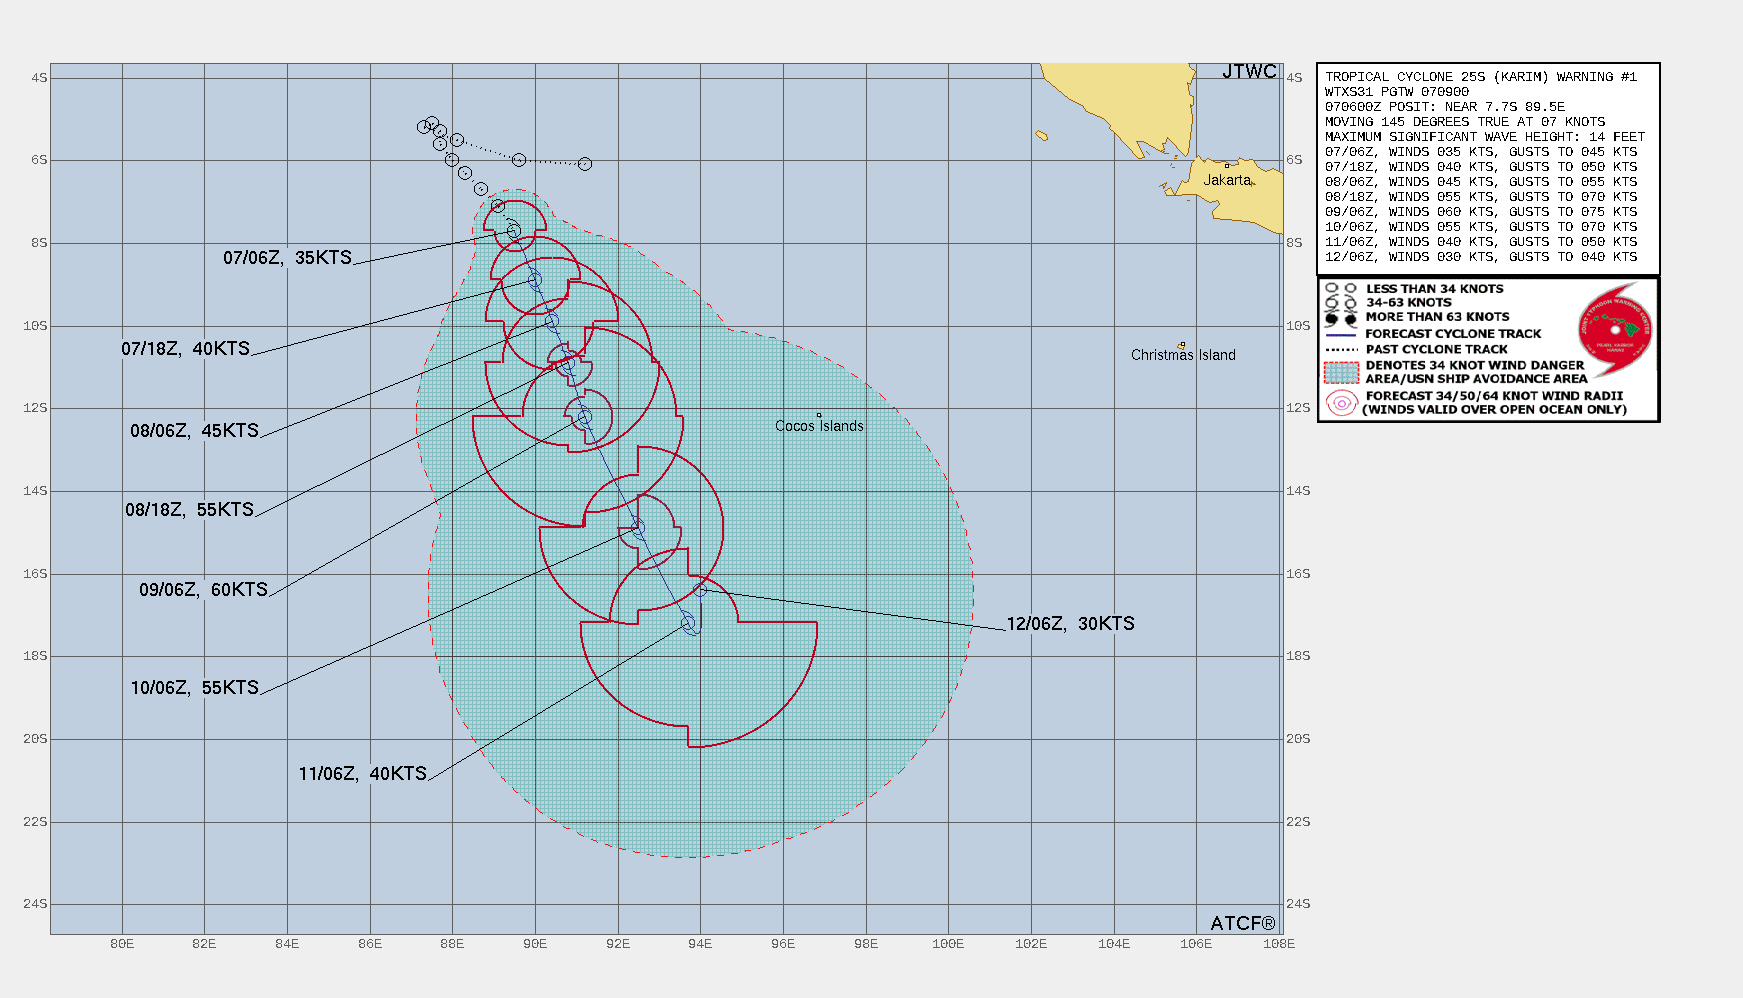 FORECAST REASONING.  SIGNIFICANT FORECAST CHANGES: THIS INITIAL PROGNOSTIC REASONING MESSAGE ESTABLISHES THE FORECAST PHILOSOPHY.  FORECAST DISCUSSION: TC 25S WILL TRACK SLOWLY POLEWARD ALONG THE WESTERN PERIPHERY OF THE NEAR EQUATORIAL RIDGE (NER) THROUGH 48H WITH GRADUAL INTENSIFICATION TO A PEAK OF 60 KNOTS BY 48H. AFTER 48H, THE SYSTEM WILL ACCELERATE POLEWARD AS IT TRACKS WITHIN THE ENHANCED FLOW BETWEEN A BROAD MIDLATITUDE TROUGH AND A SUBTROPICAL RIDGE TO THE EAST. RAPID WEAKENING WILL OCCUR AS THE SYSTEM ENCOUNTERS INCREASING VERTICAL WIND SHEAR AND DRY AIR ENTRAINMENT. AFTER 96H,  THE SYSTEM WILL WEAKEN AND STALL AS IT ENCOUNTERS A STRONG HIGH BUILDING TO THE SOUTH EFFECTIVELY BLOCKING FURTHER POLEWARD MOTION. TC 25S SHOULD DISSIPATE BY 120H WITH THE REMNANTS TRACKING BACK TOWARD THE EQUATOR UNDER THE LOW-LEVEL SOUTHEASTERLY FLOW ASSOCIATED WITH THE AFOREMENTIONED HIGH.